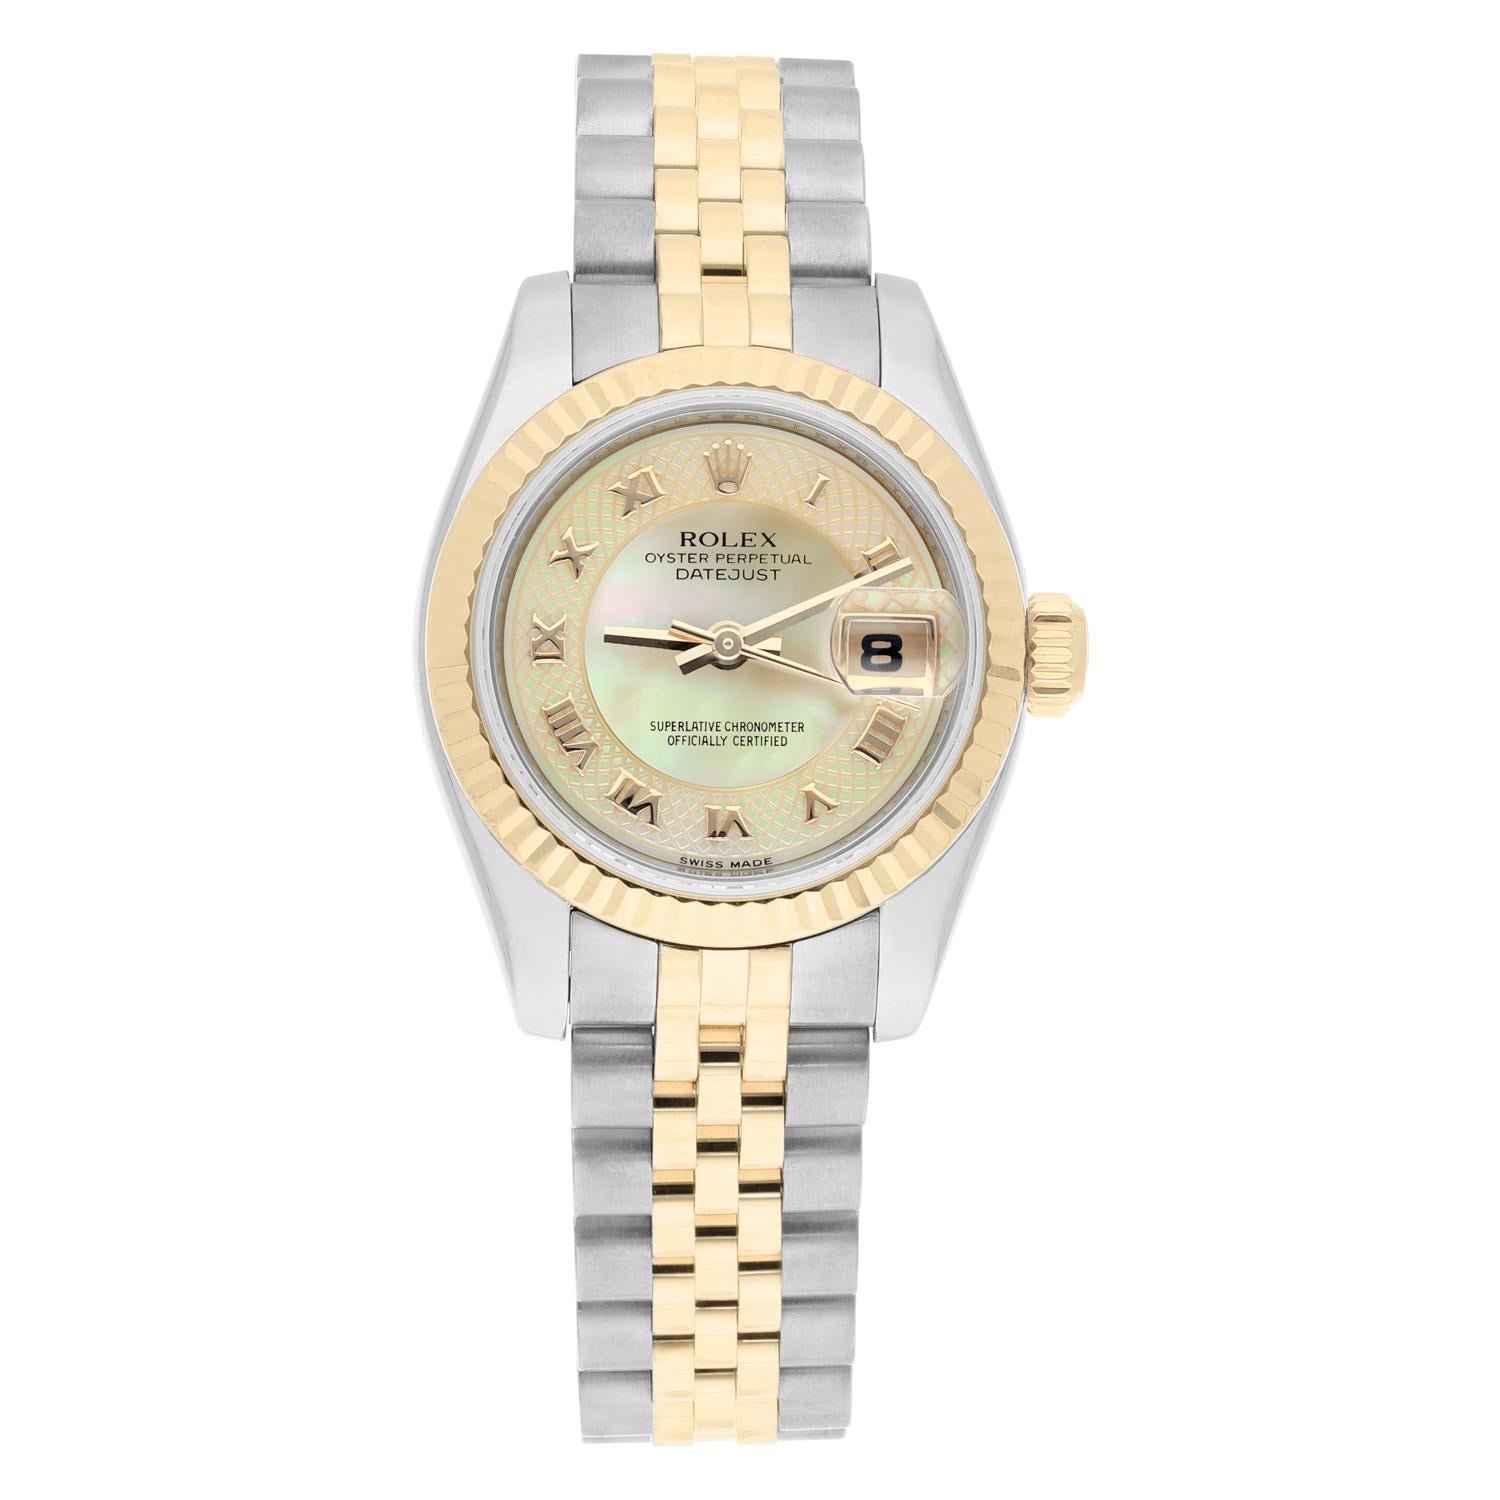 This stunning Rolex Datejust two-tone ladies watch combines luxury and elegance. The silver case is complemented by a yellow gold fluted bezel and features Roman numerals on the rare mother of pearl dial. The watch is powered by a mechanical